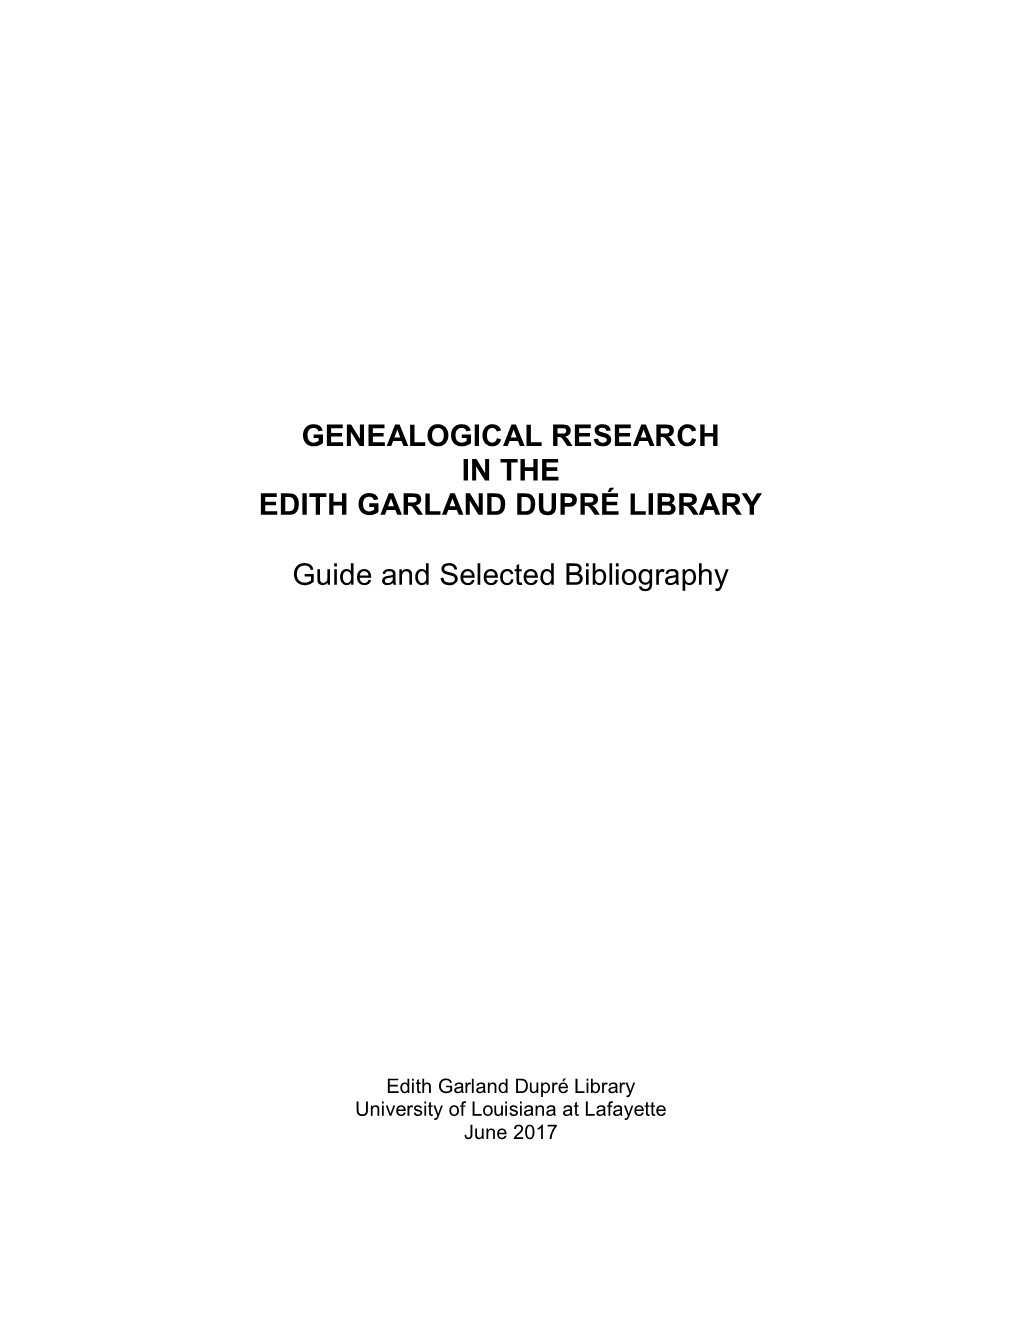 A Genealogical Research